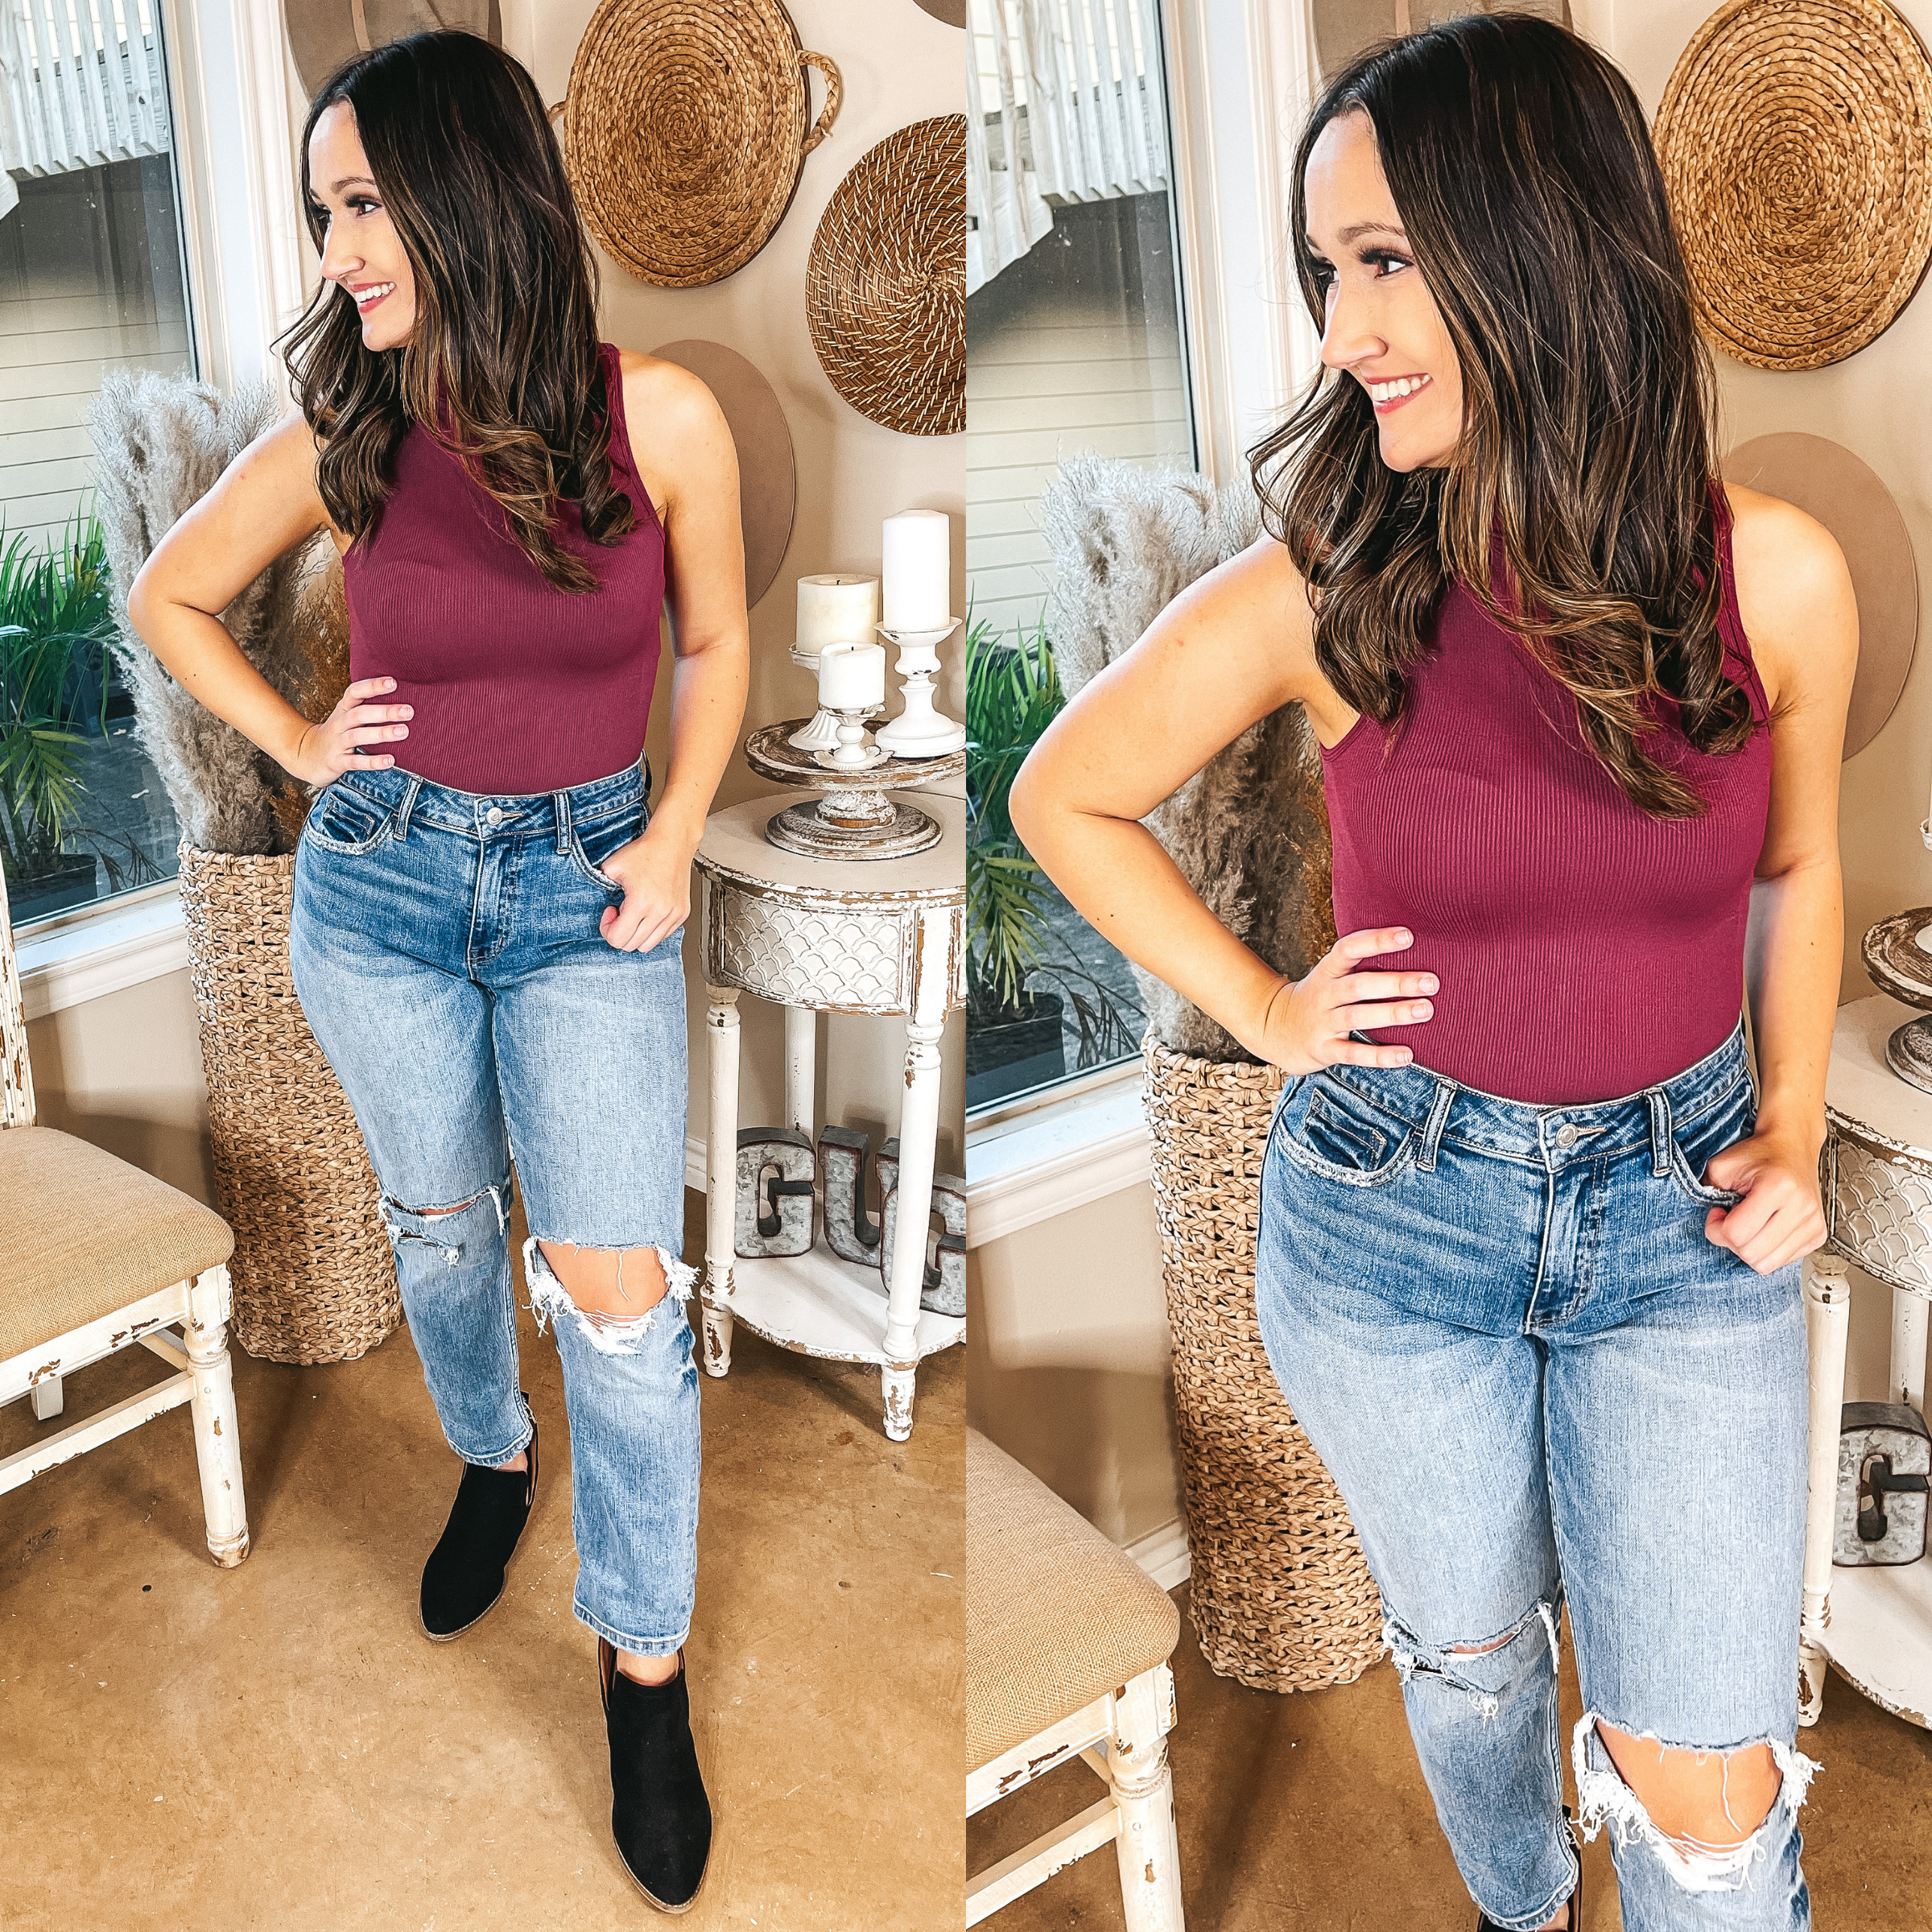 Model is wearing a mock turtle neck tank top bodysuit. Model has it paired with distressed light wash jeans, black booties, and gold jewelry.